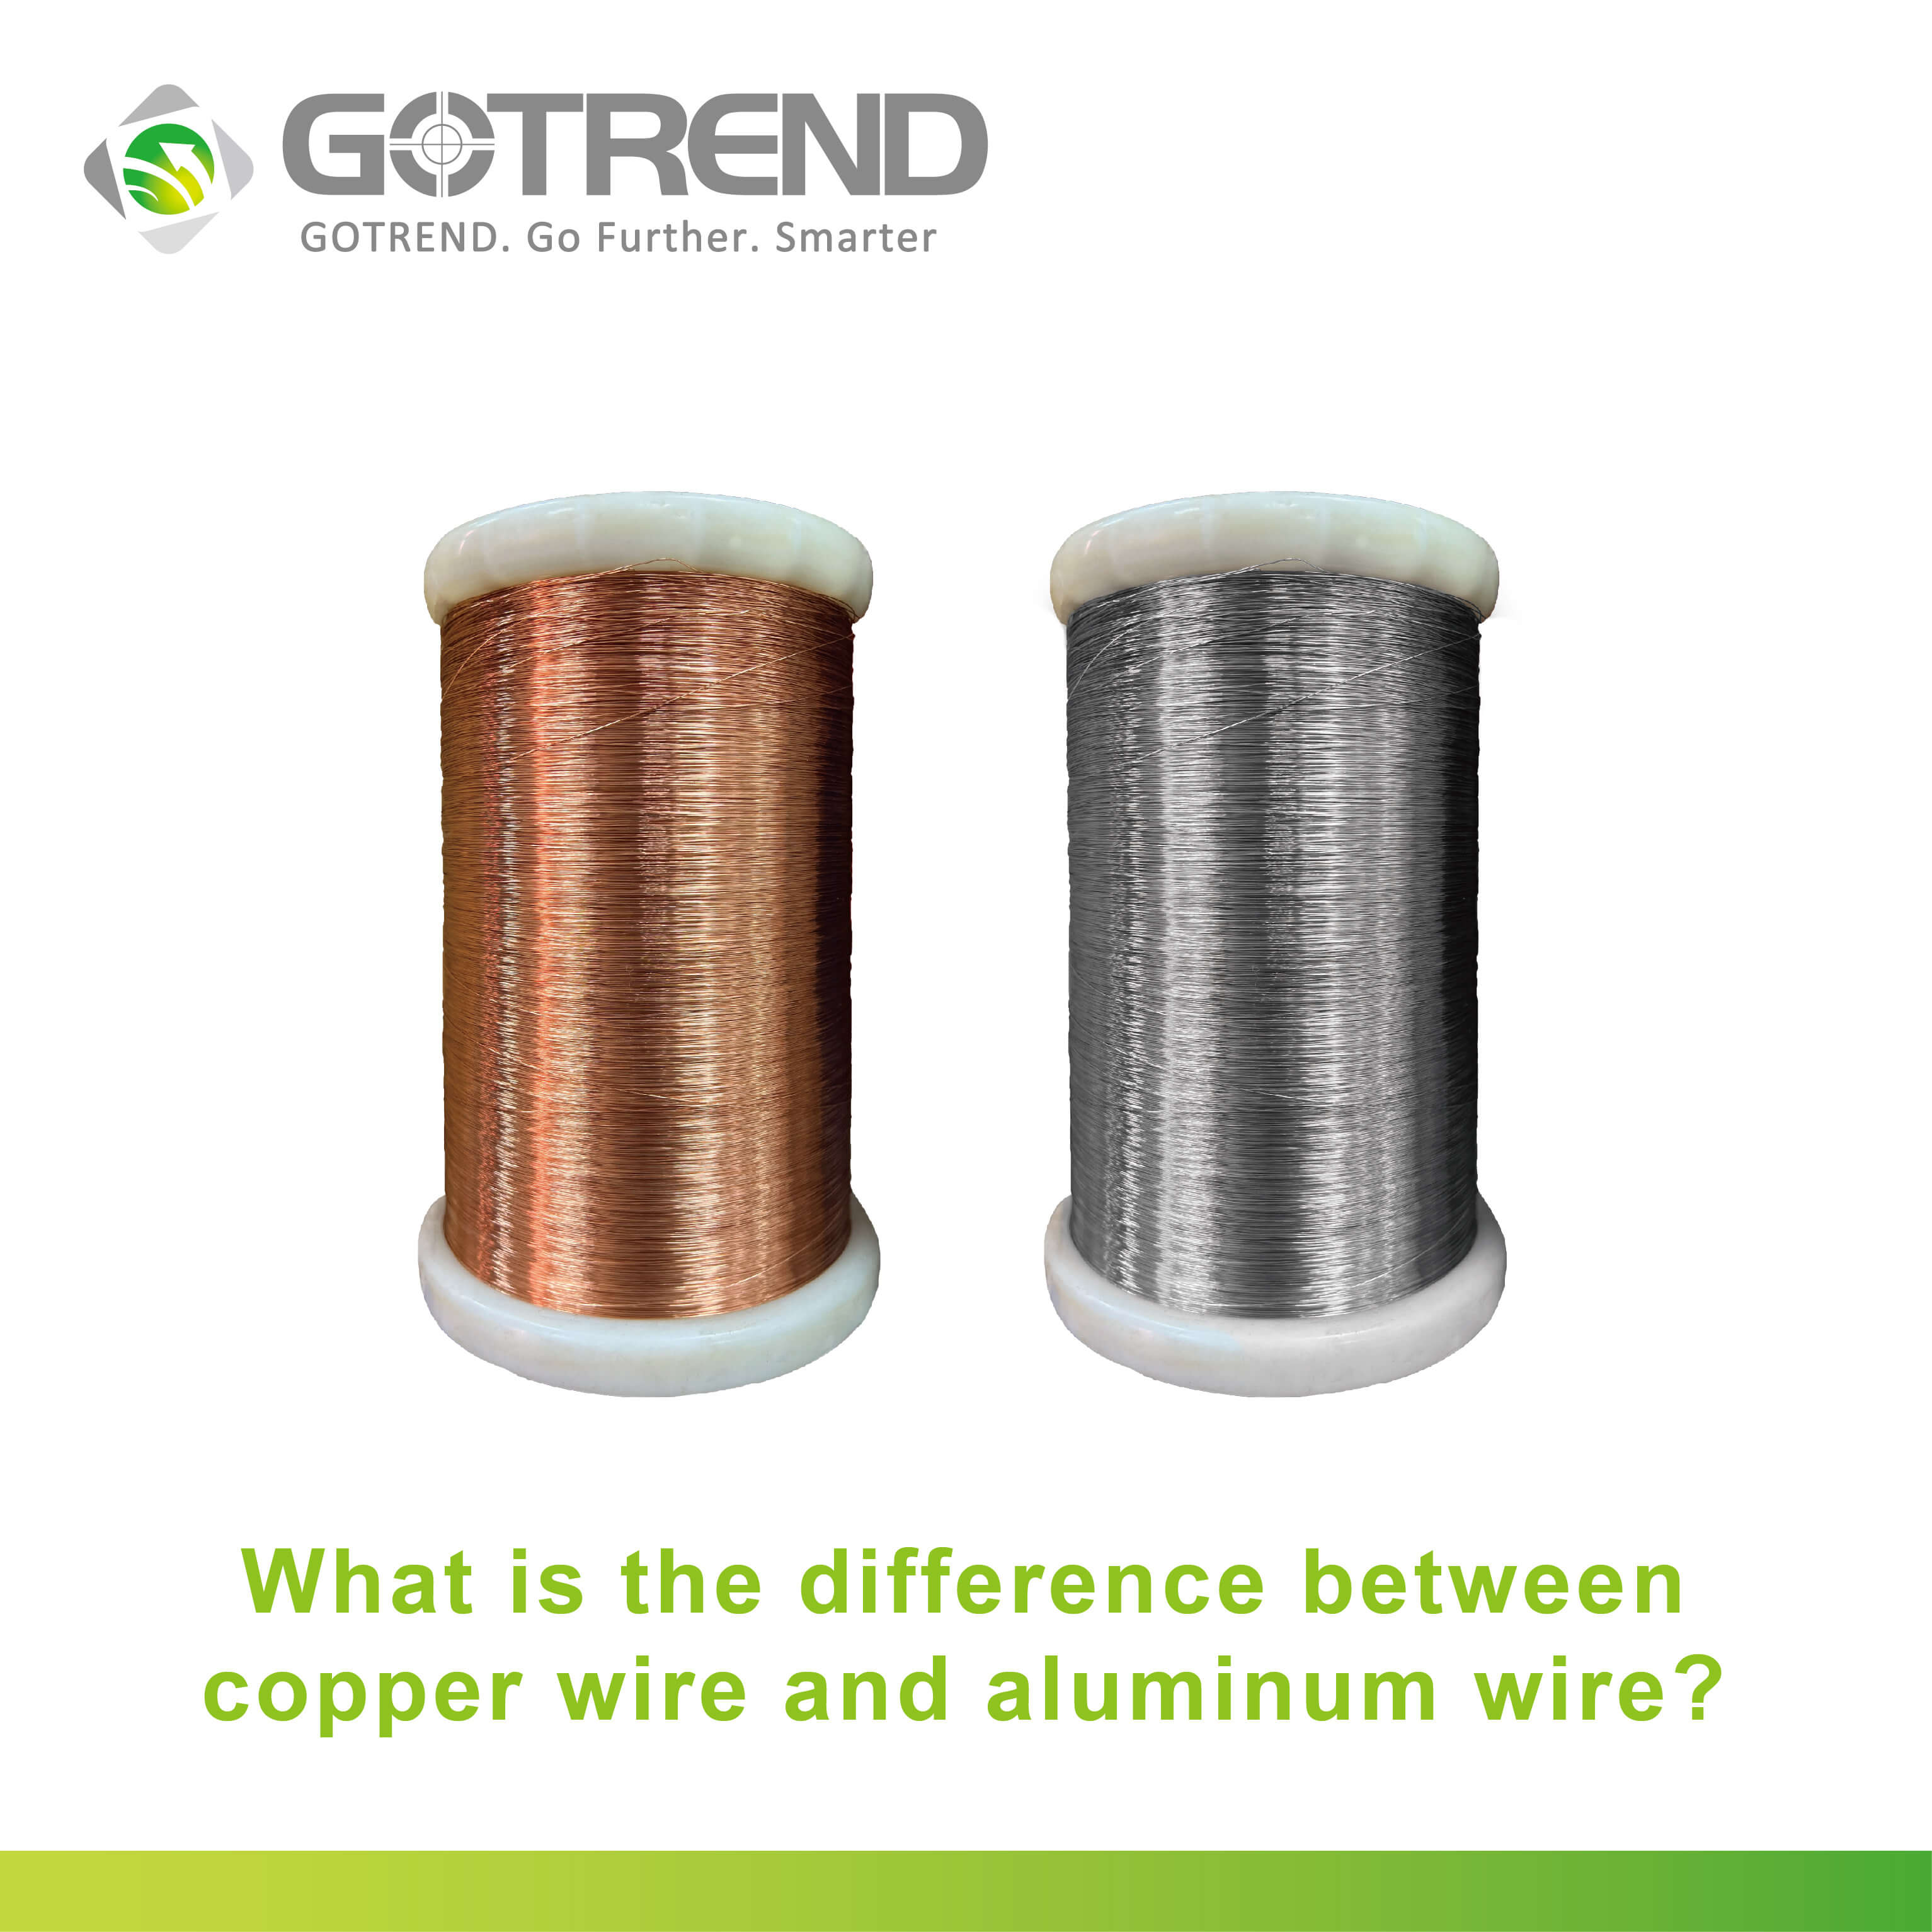 GOTREND Article-What is the difference between copper wire and aluminum wire?